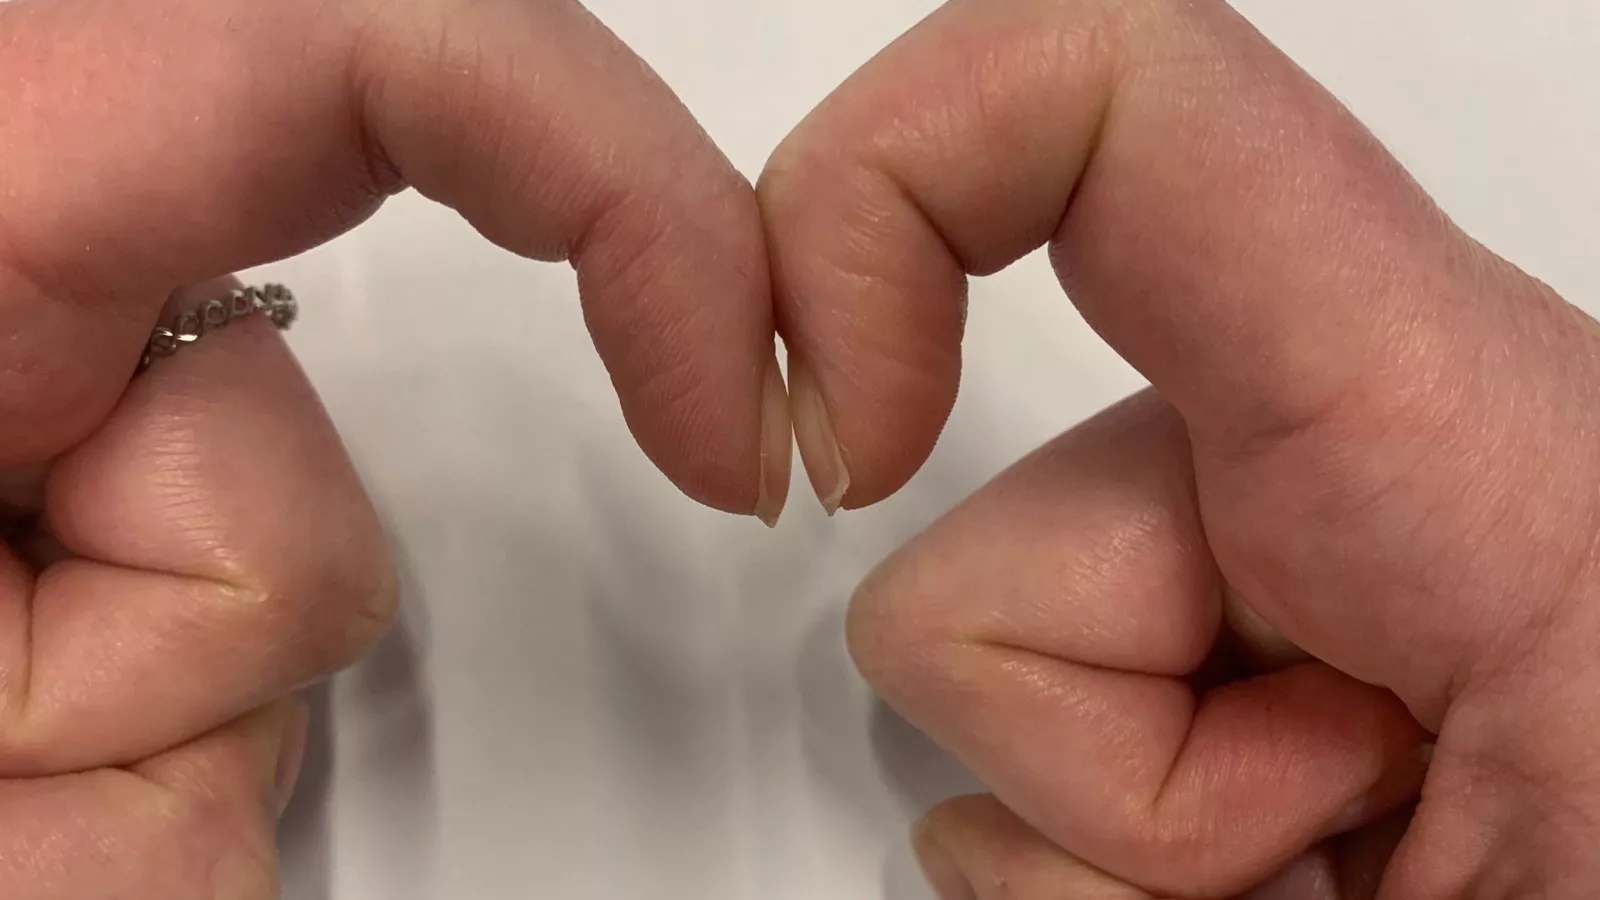 What your fingers say about you, Cancer research